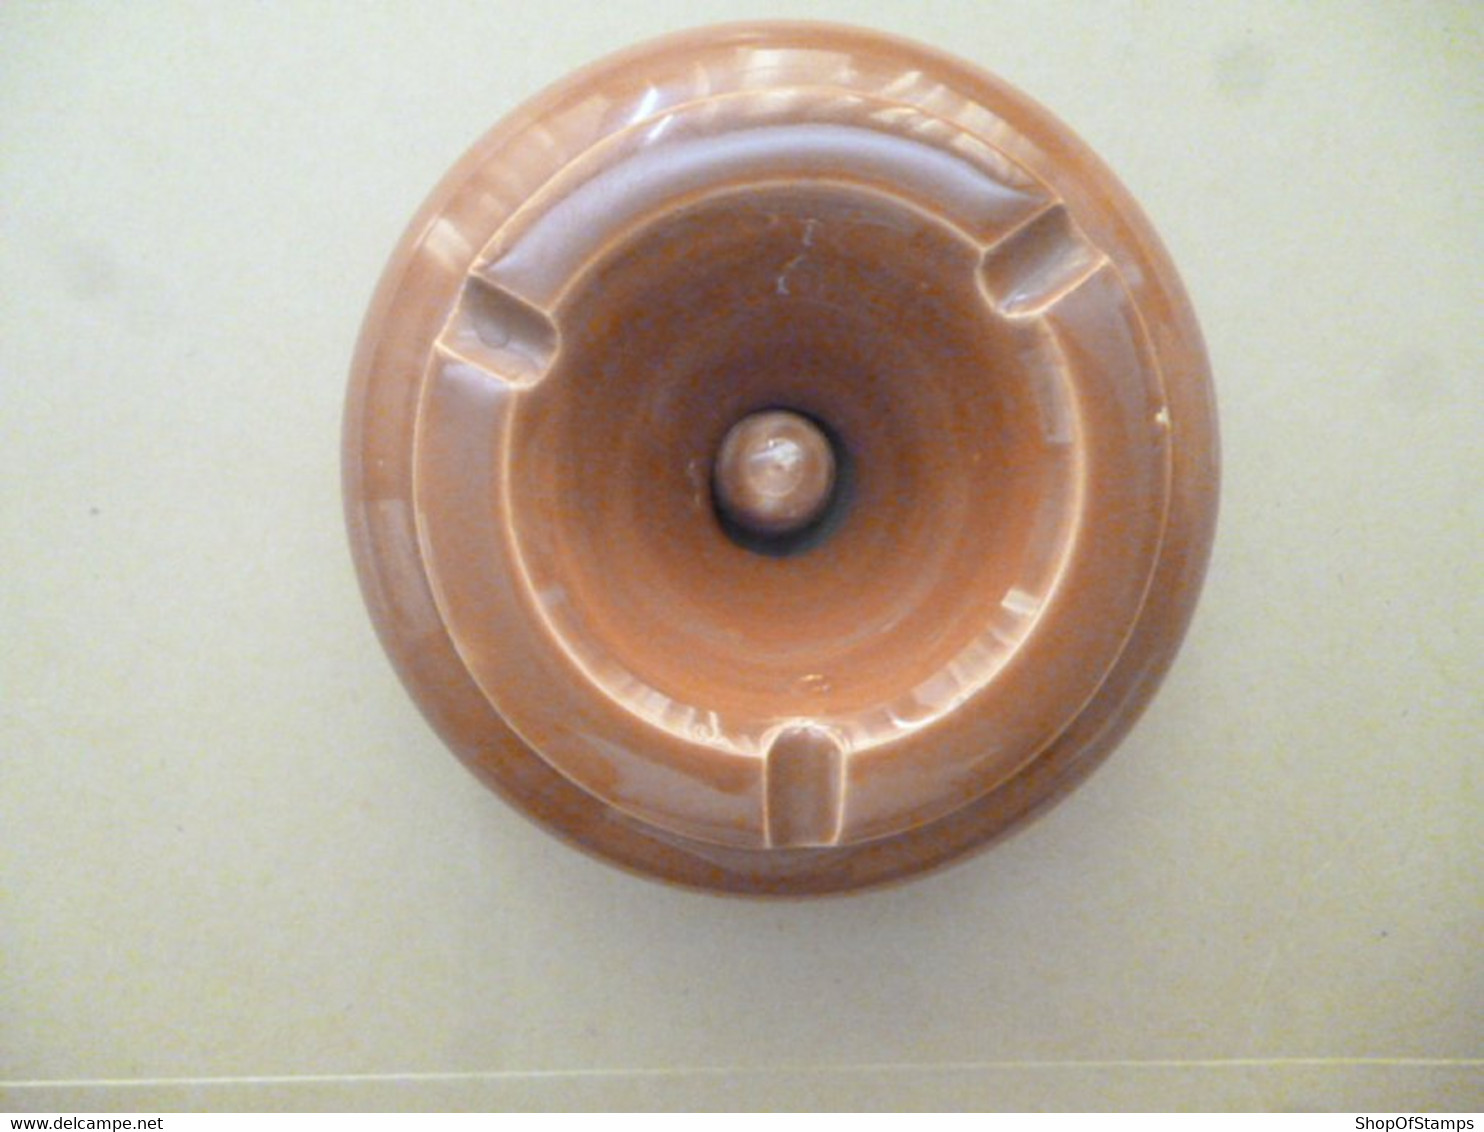 ASH TRAY WITH BASE AS BOWL FOR WATER FOR ASH - Porcelain